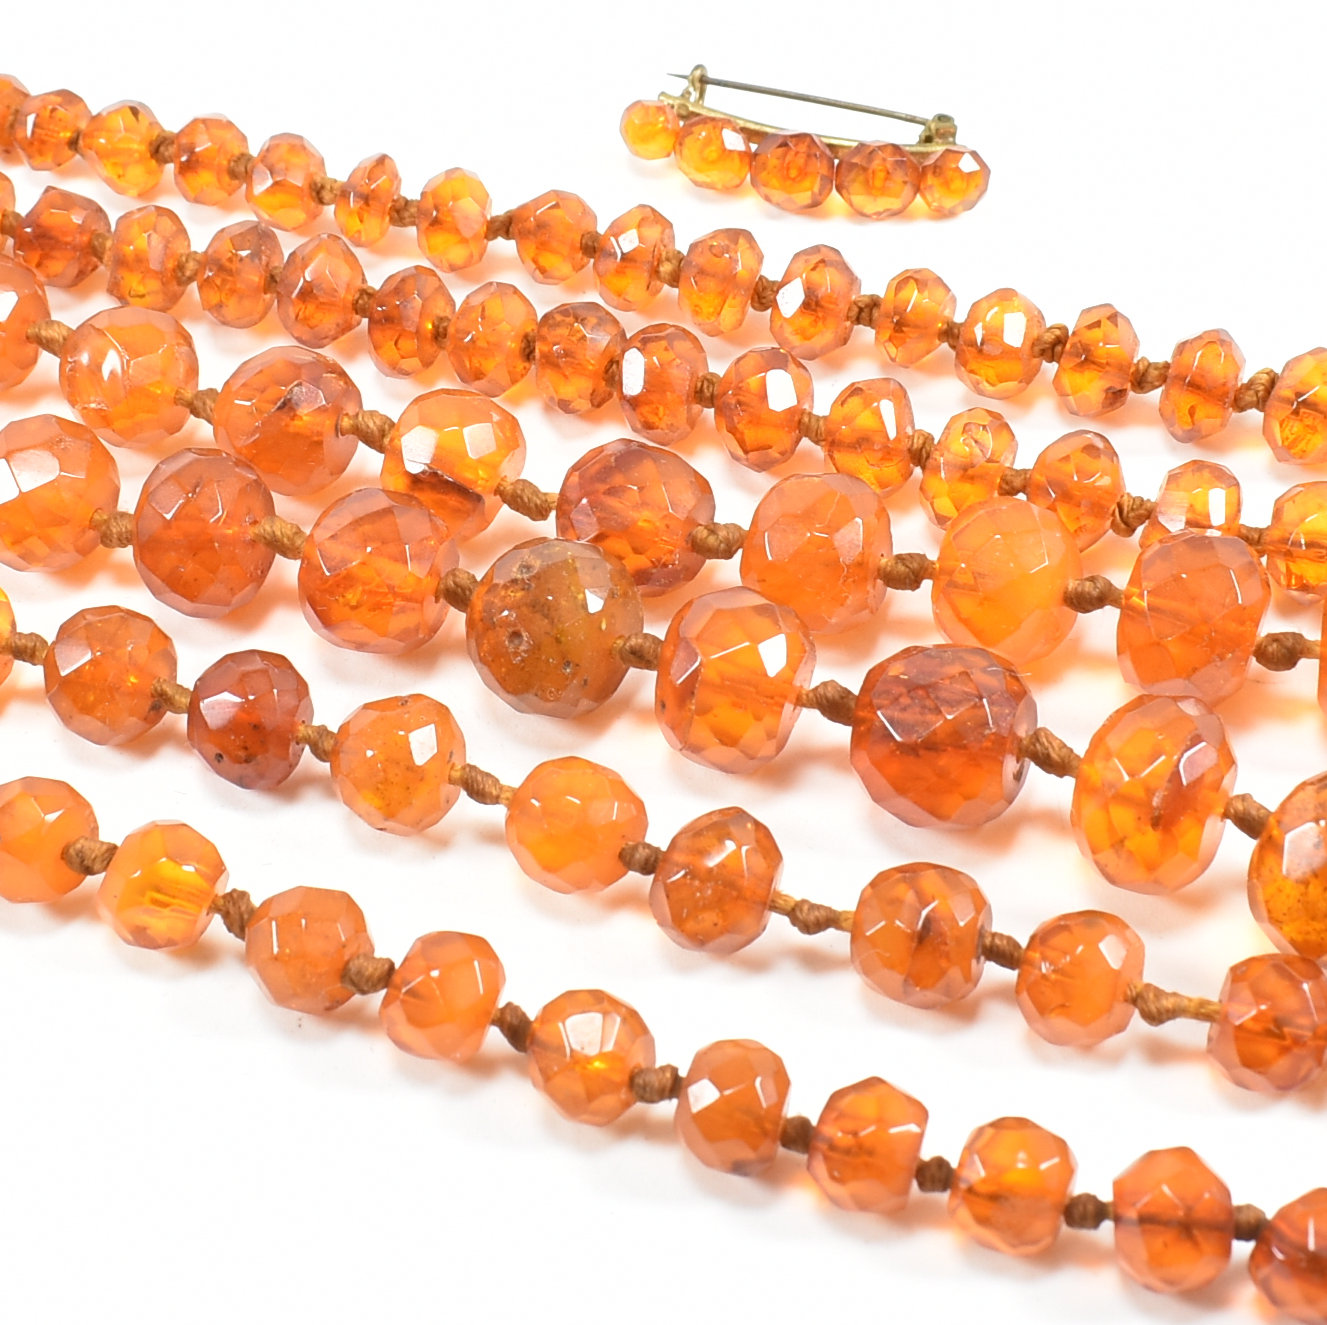 19TH CENTURY VICTORIAN AMBER BEAD NECKLACES & BROOCH PIN SET - Image 4 of 8